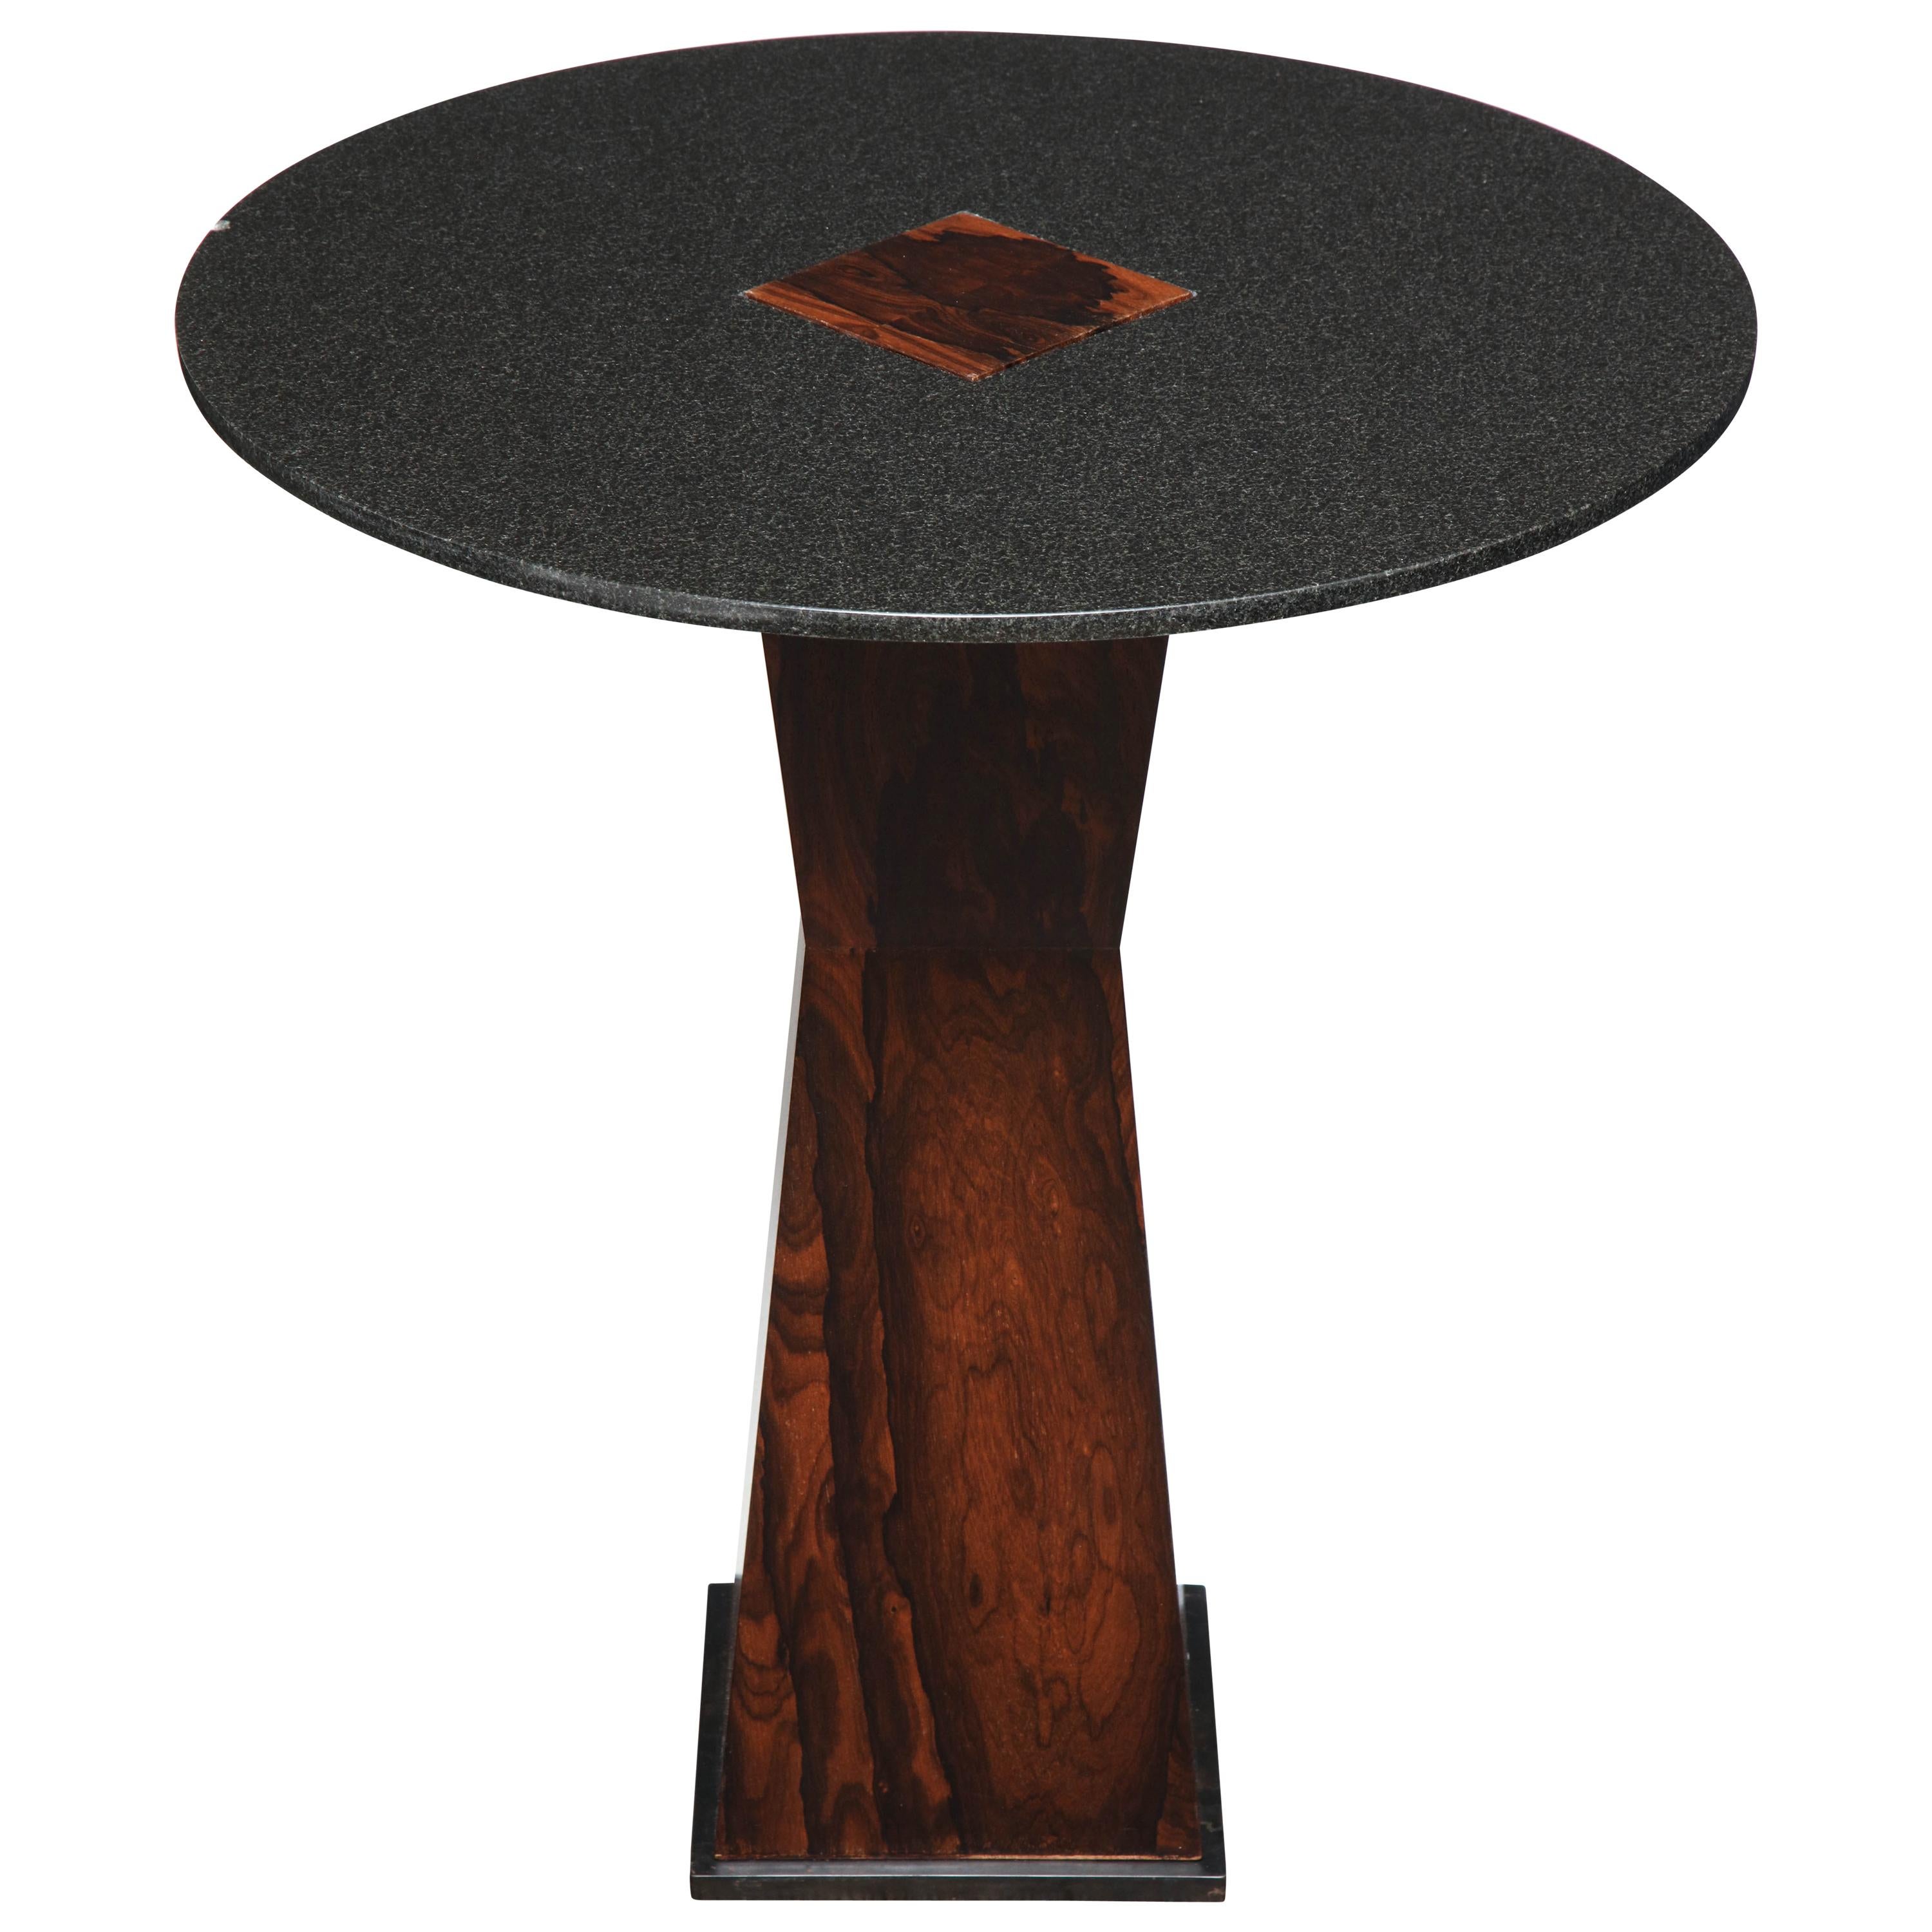 Absolute Black Granite Side Table with Sculptural Wood Base